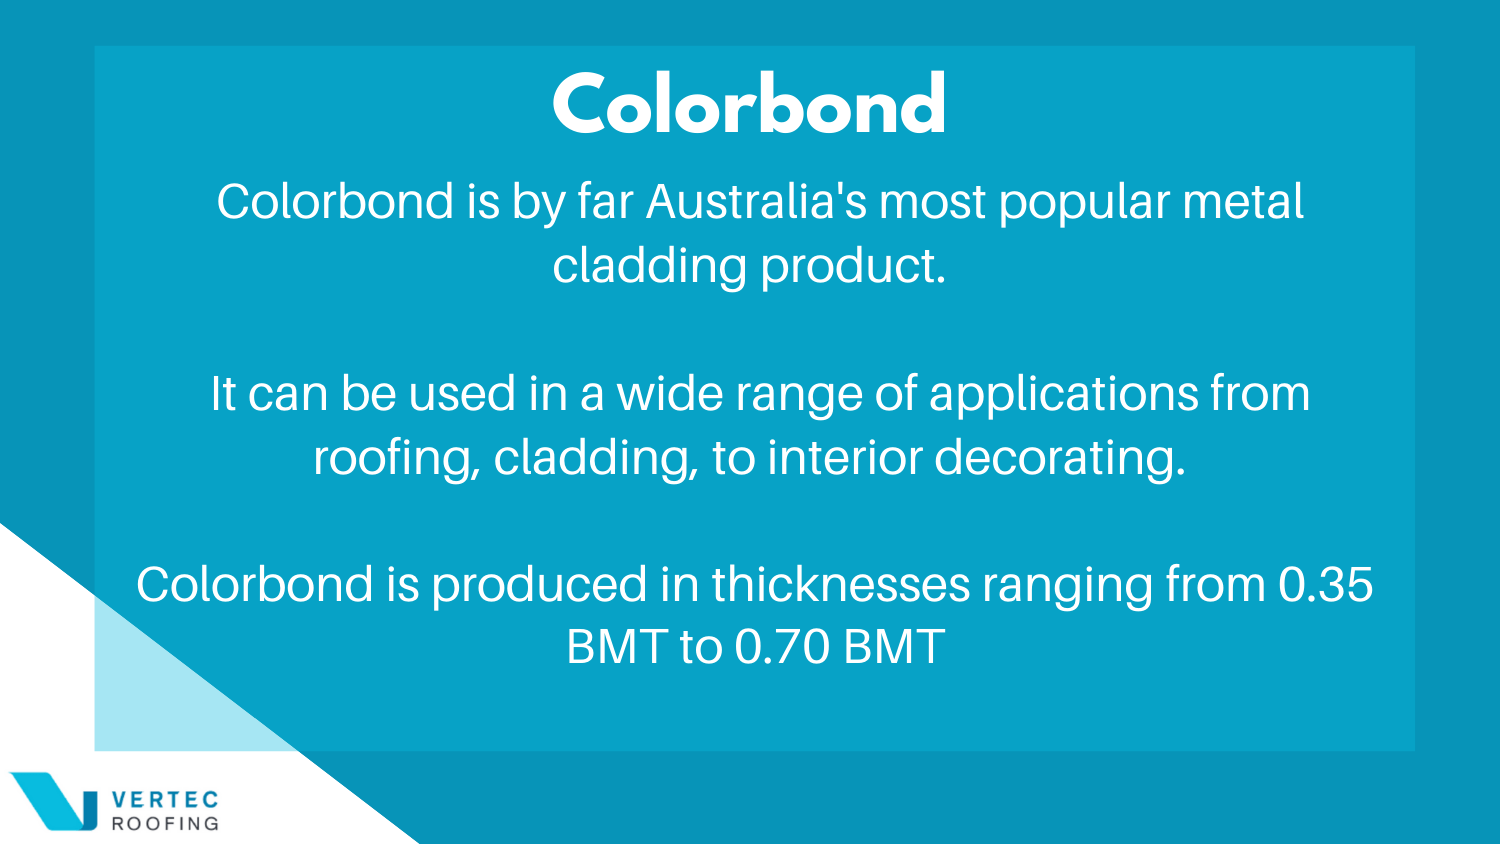 brief guide to colorbond and the thicknesses it is produced in